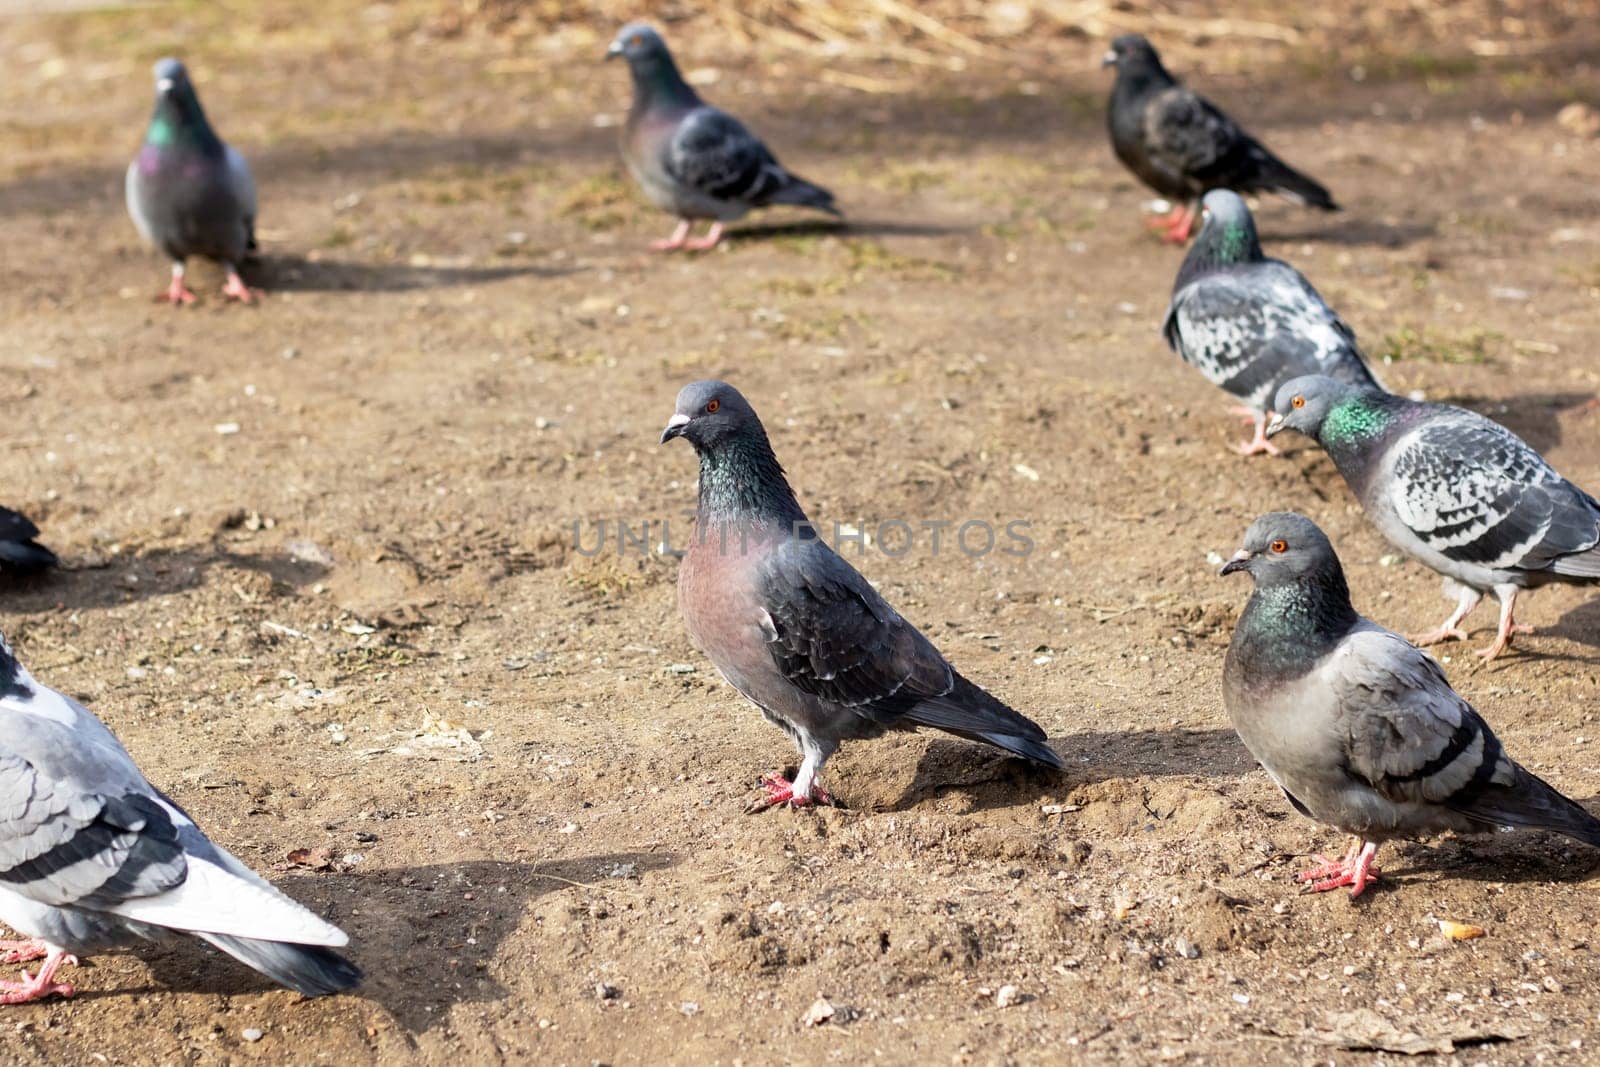 A group of pigeons with black, blue, and green feathers stand on the dirt ground. As vertebrate organisms, they make a beautiful sight in nature